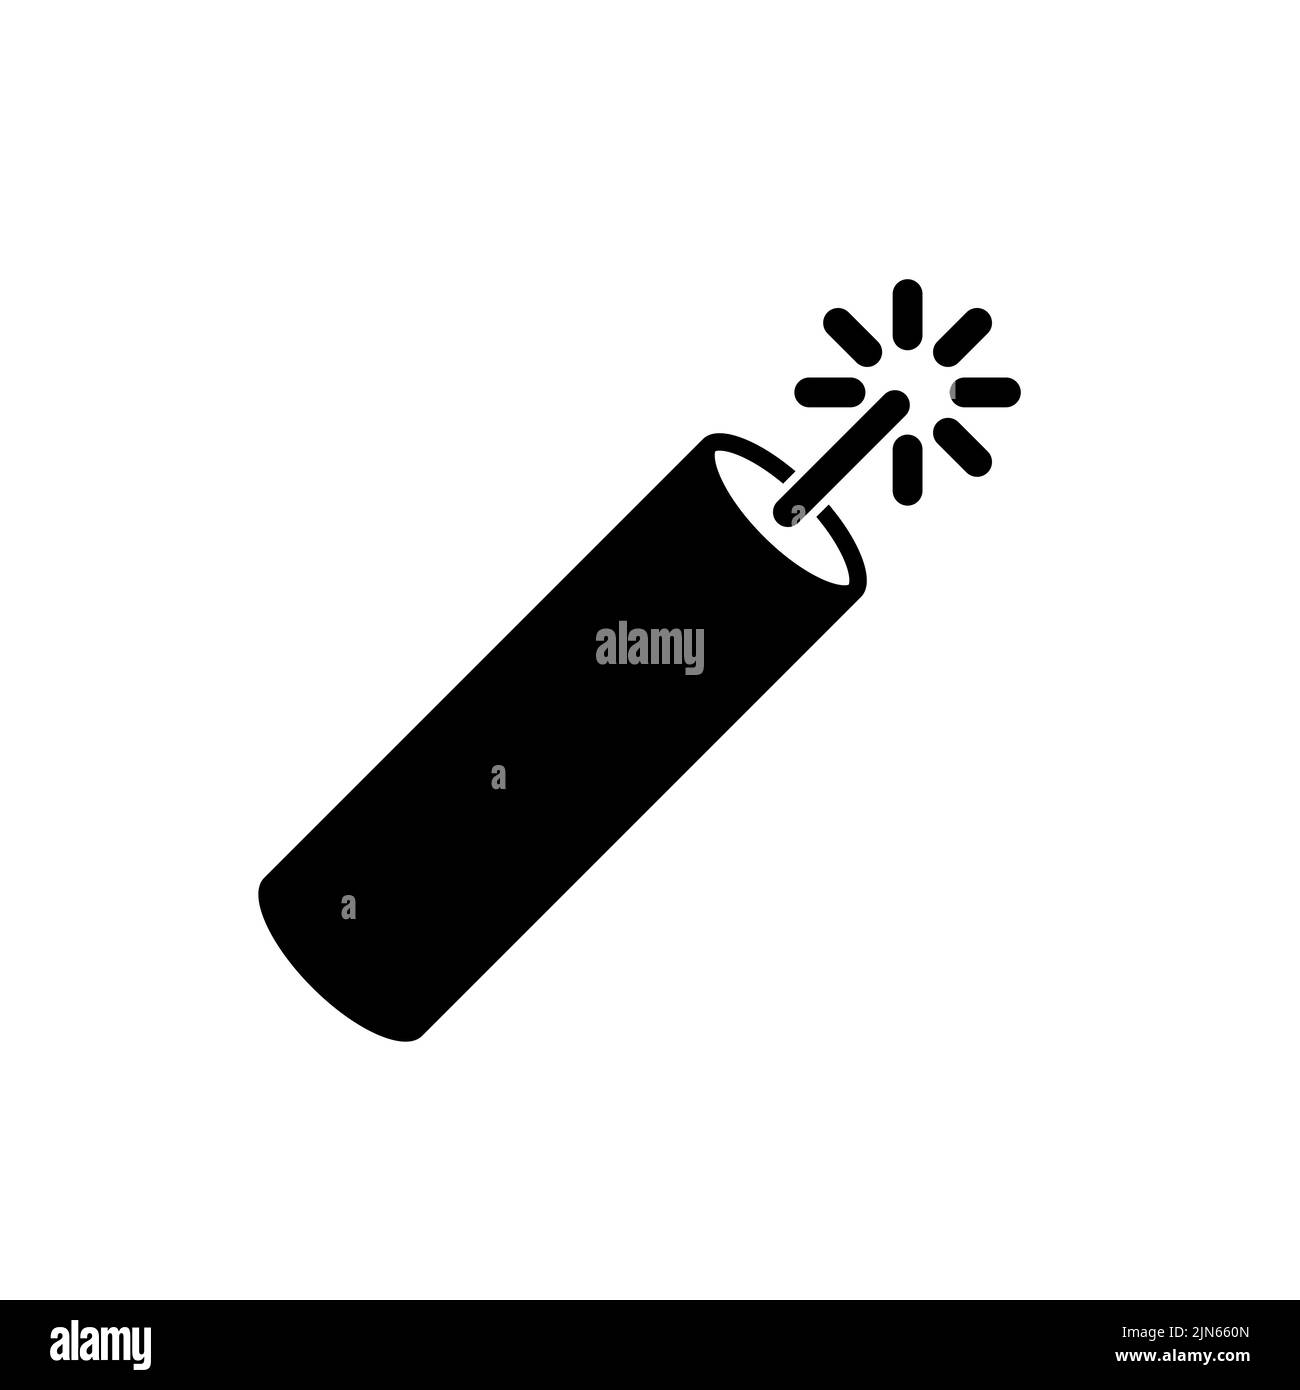 Dynamite stick icon. Dynamite isolated icon. Black sign. Vector illustration. Stock Vector